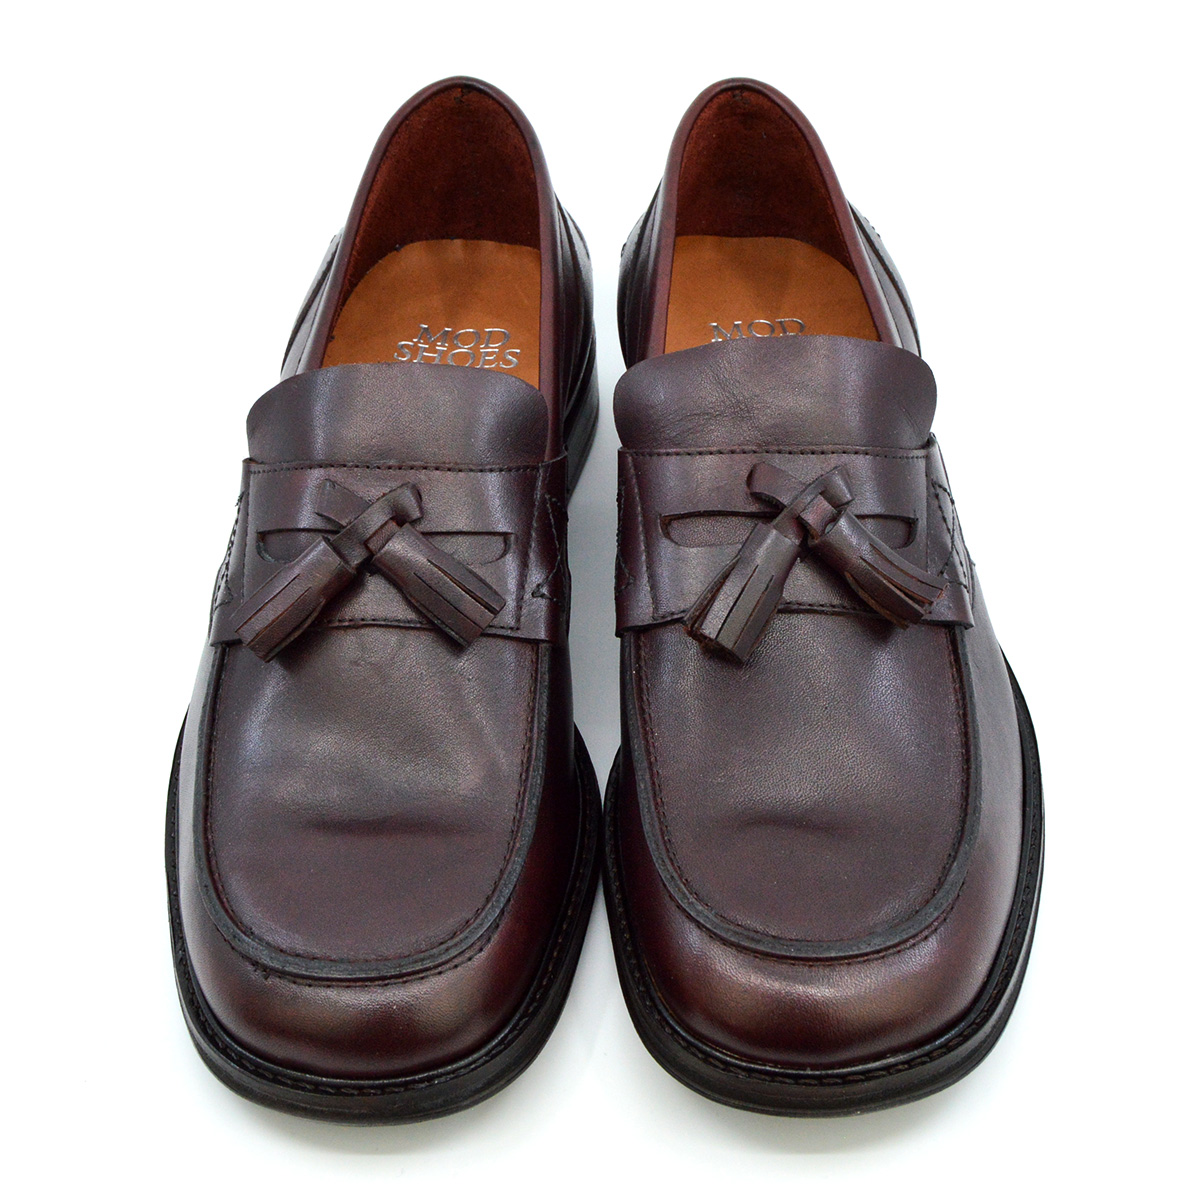 NEW Mens Shoes Oxblood Tassel Loafers  60s 70s Mod Style  by IKON 